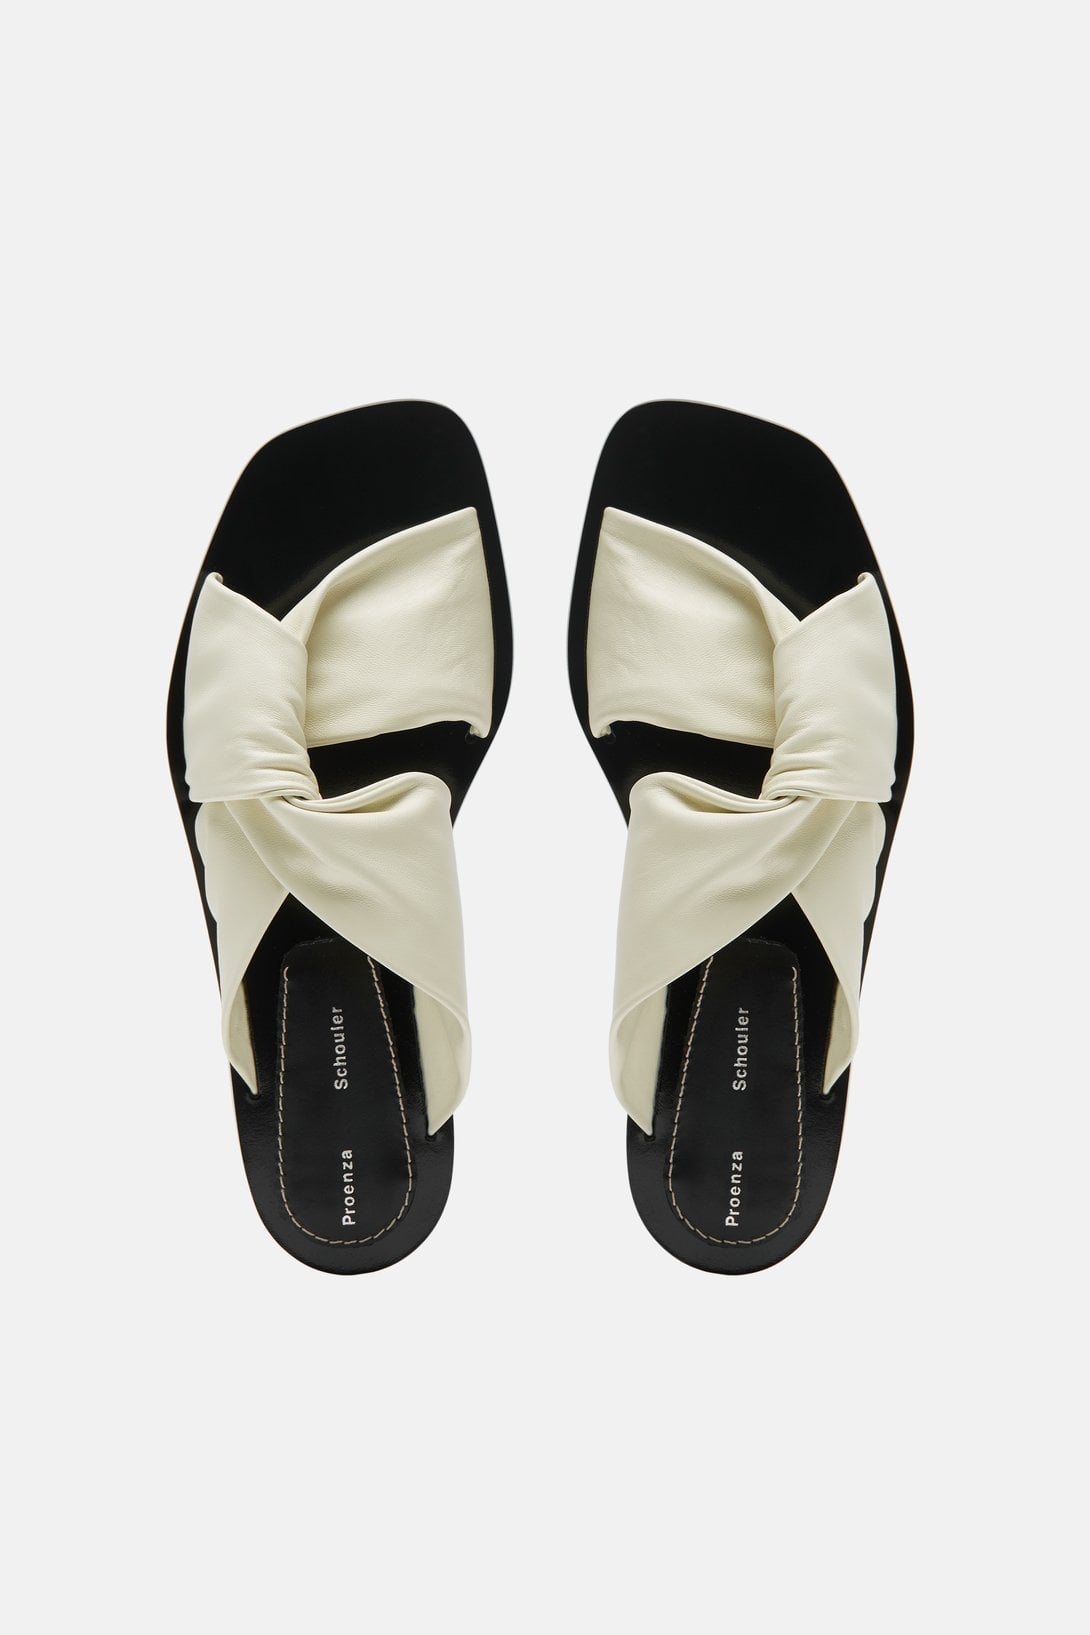 Proenza Schouler Side-Twist Shoes | Warning: You're About to Purchase All  28 of Our Editors' Stylish April Must Haves | POPSUGAR Fashion Photo 15